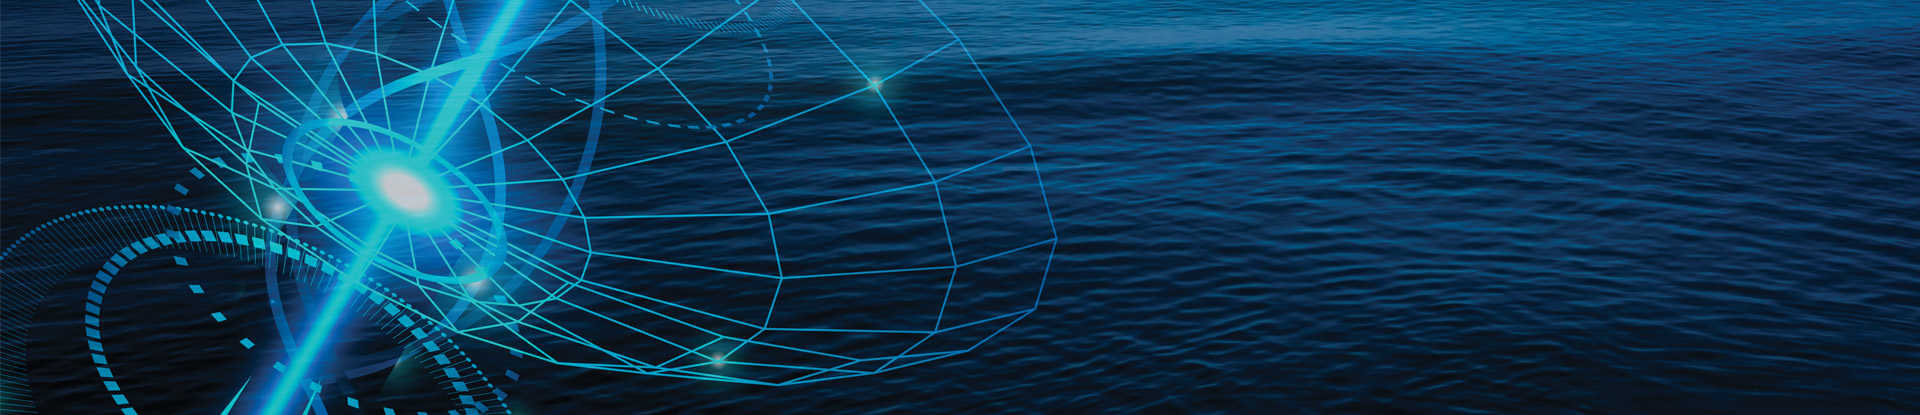 Blue sea background with a highlighted antenna outline graphic on the left side.